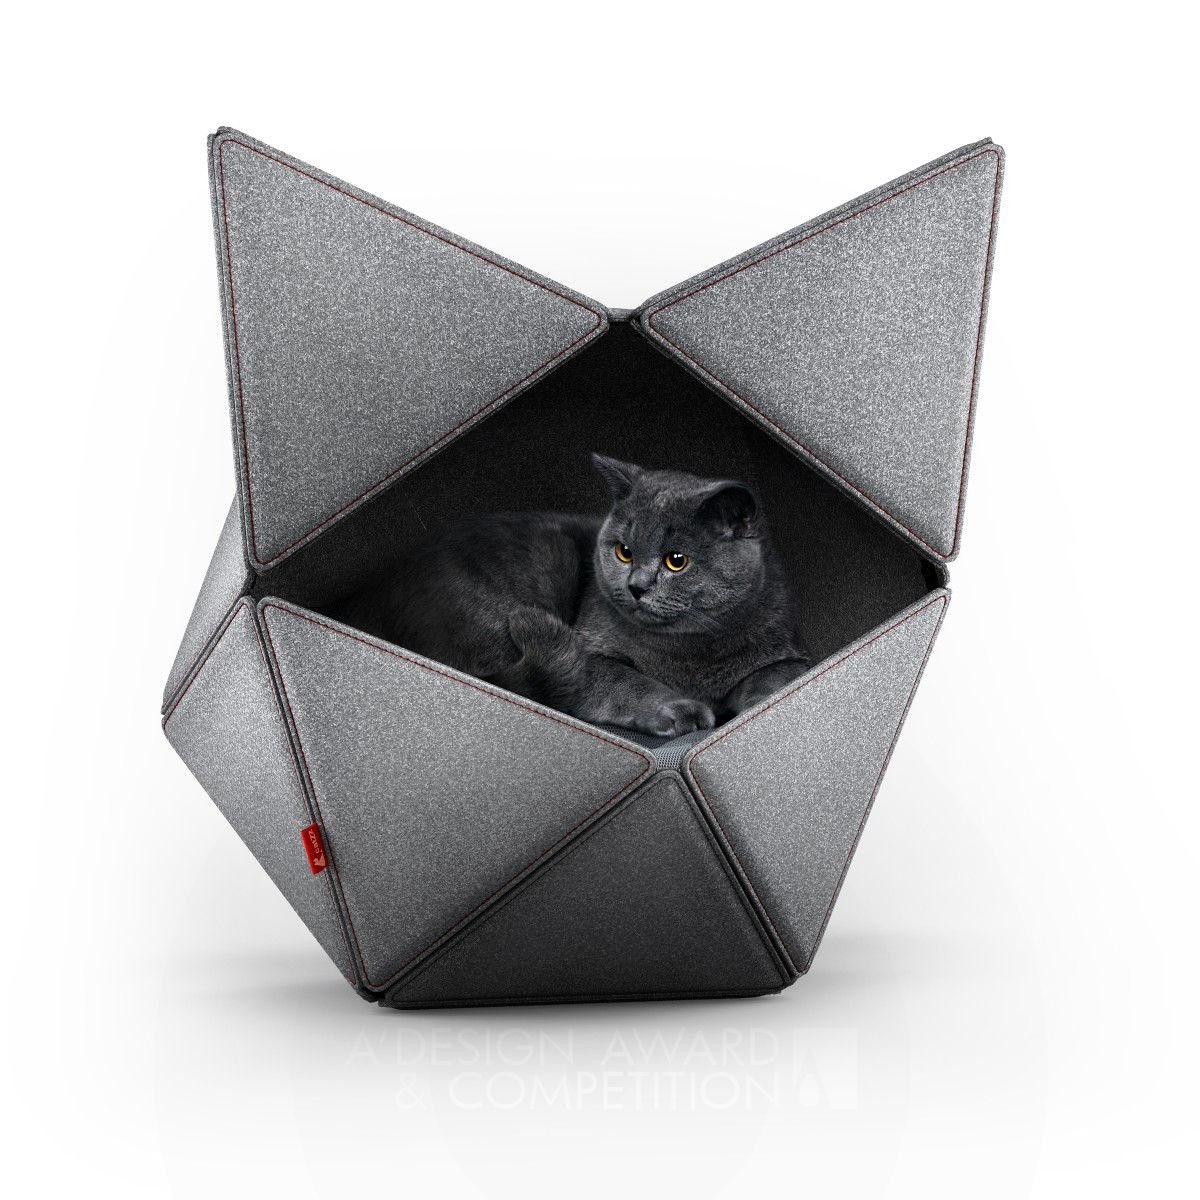 Catzz Cat Bed by Mirko Vujicic Platinum Pet Care, Toys, Supplies and Products for Animals Design Award Winner 2020 